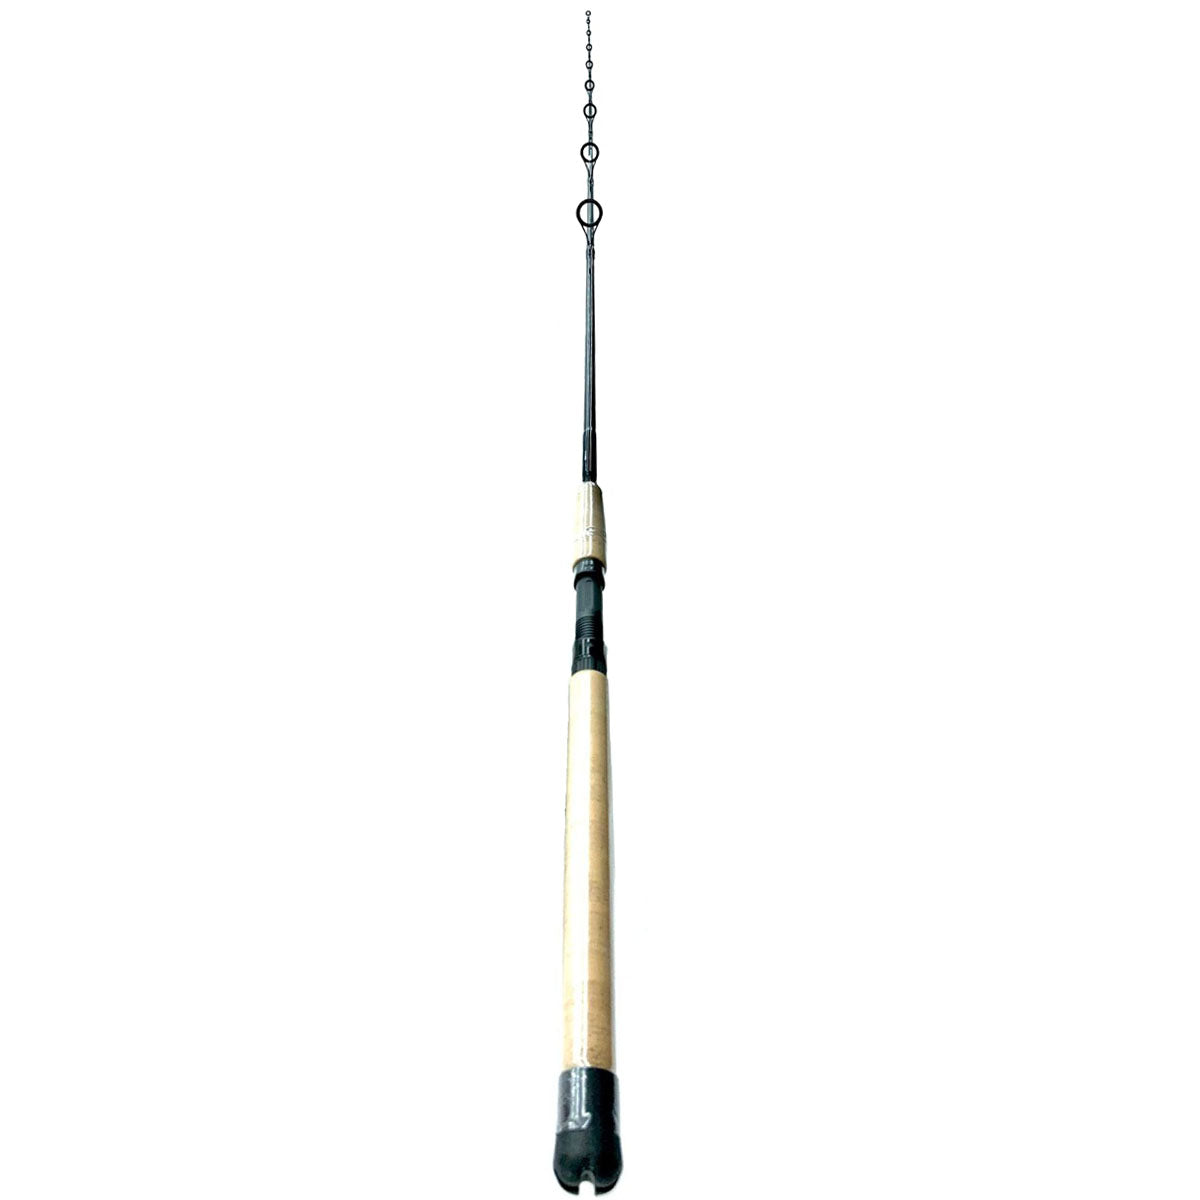 fishing rod carbon 150, fishing rod carbon 150 Suppliers and